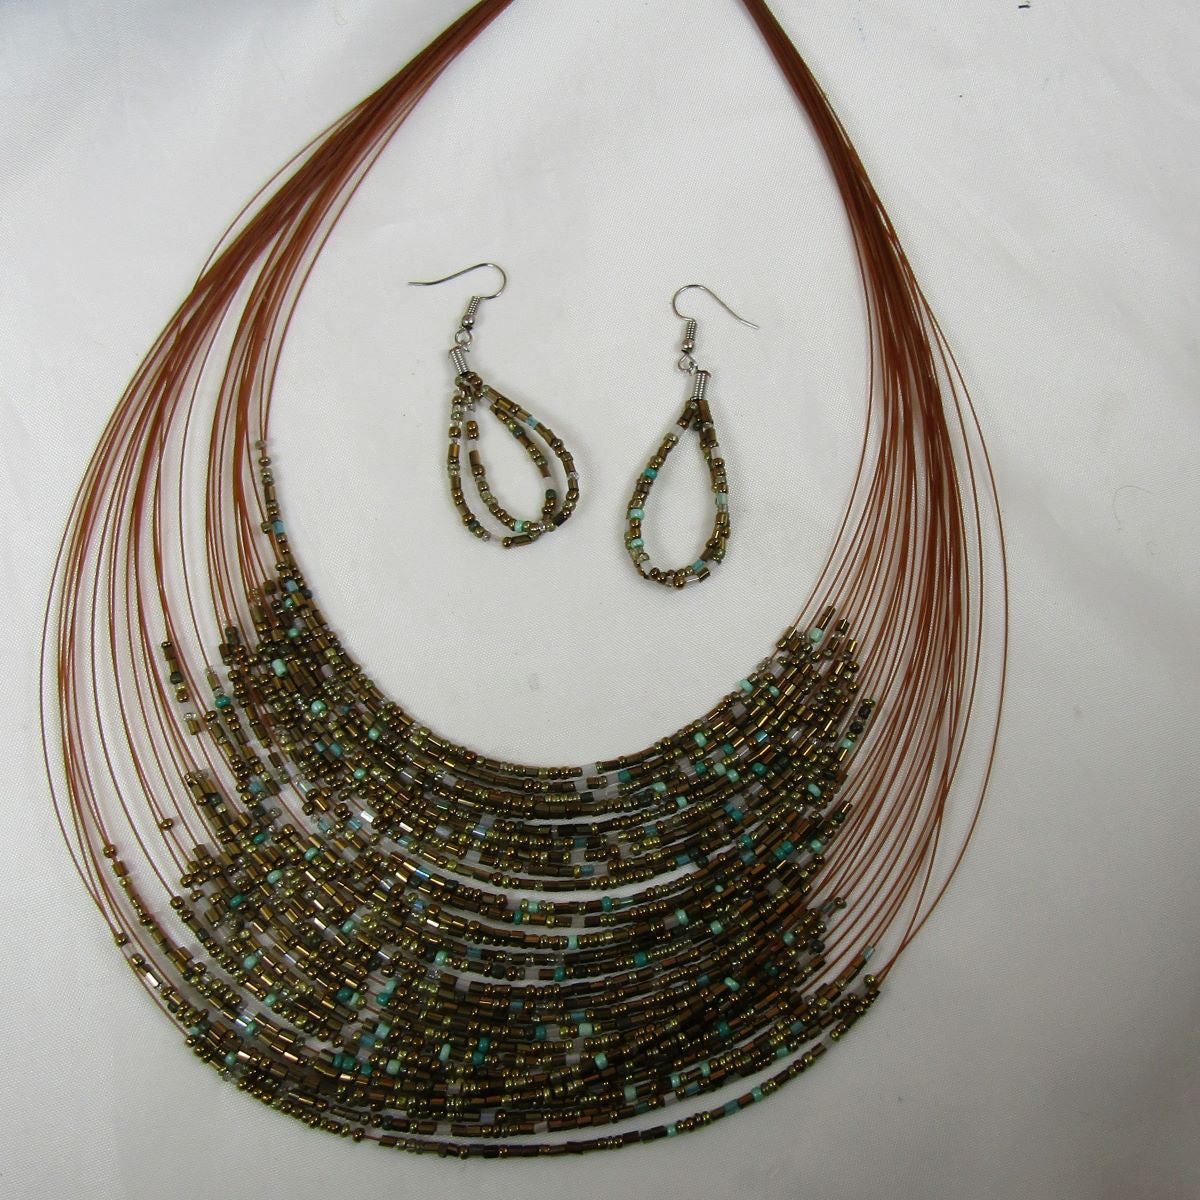 Gold Seed Bead Multi-strand Necklace and Earrings - VP's Jewelry